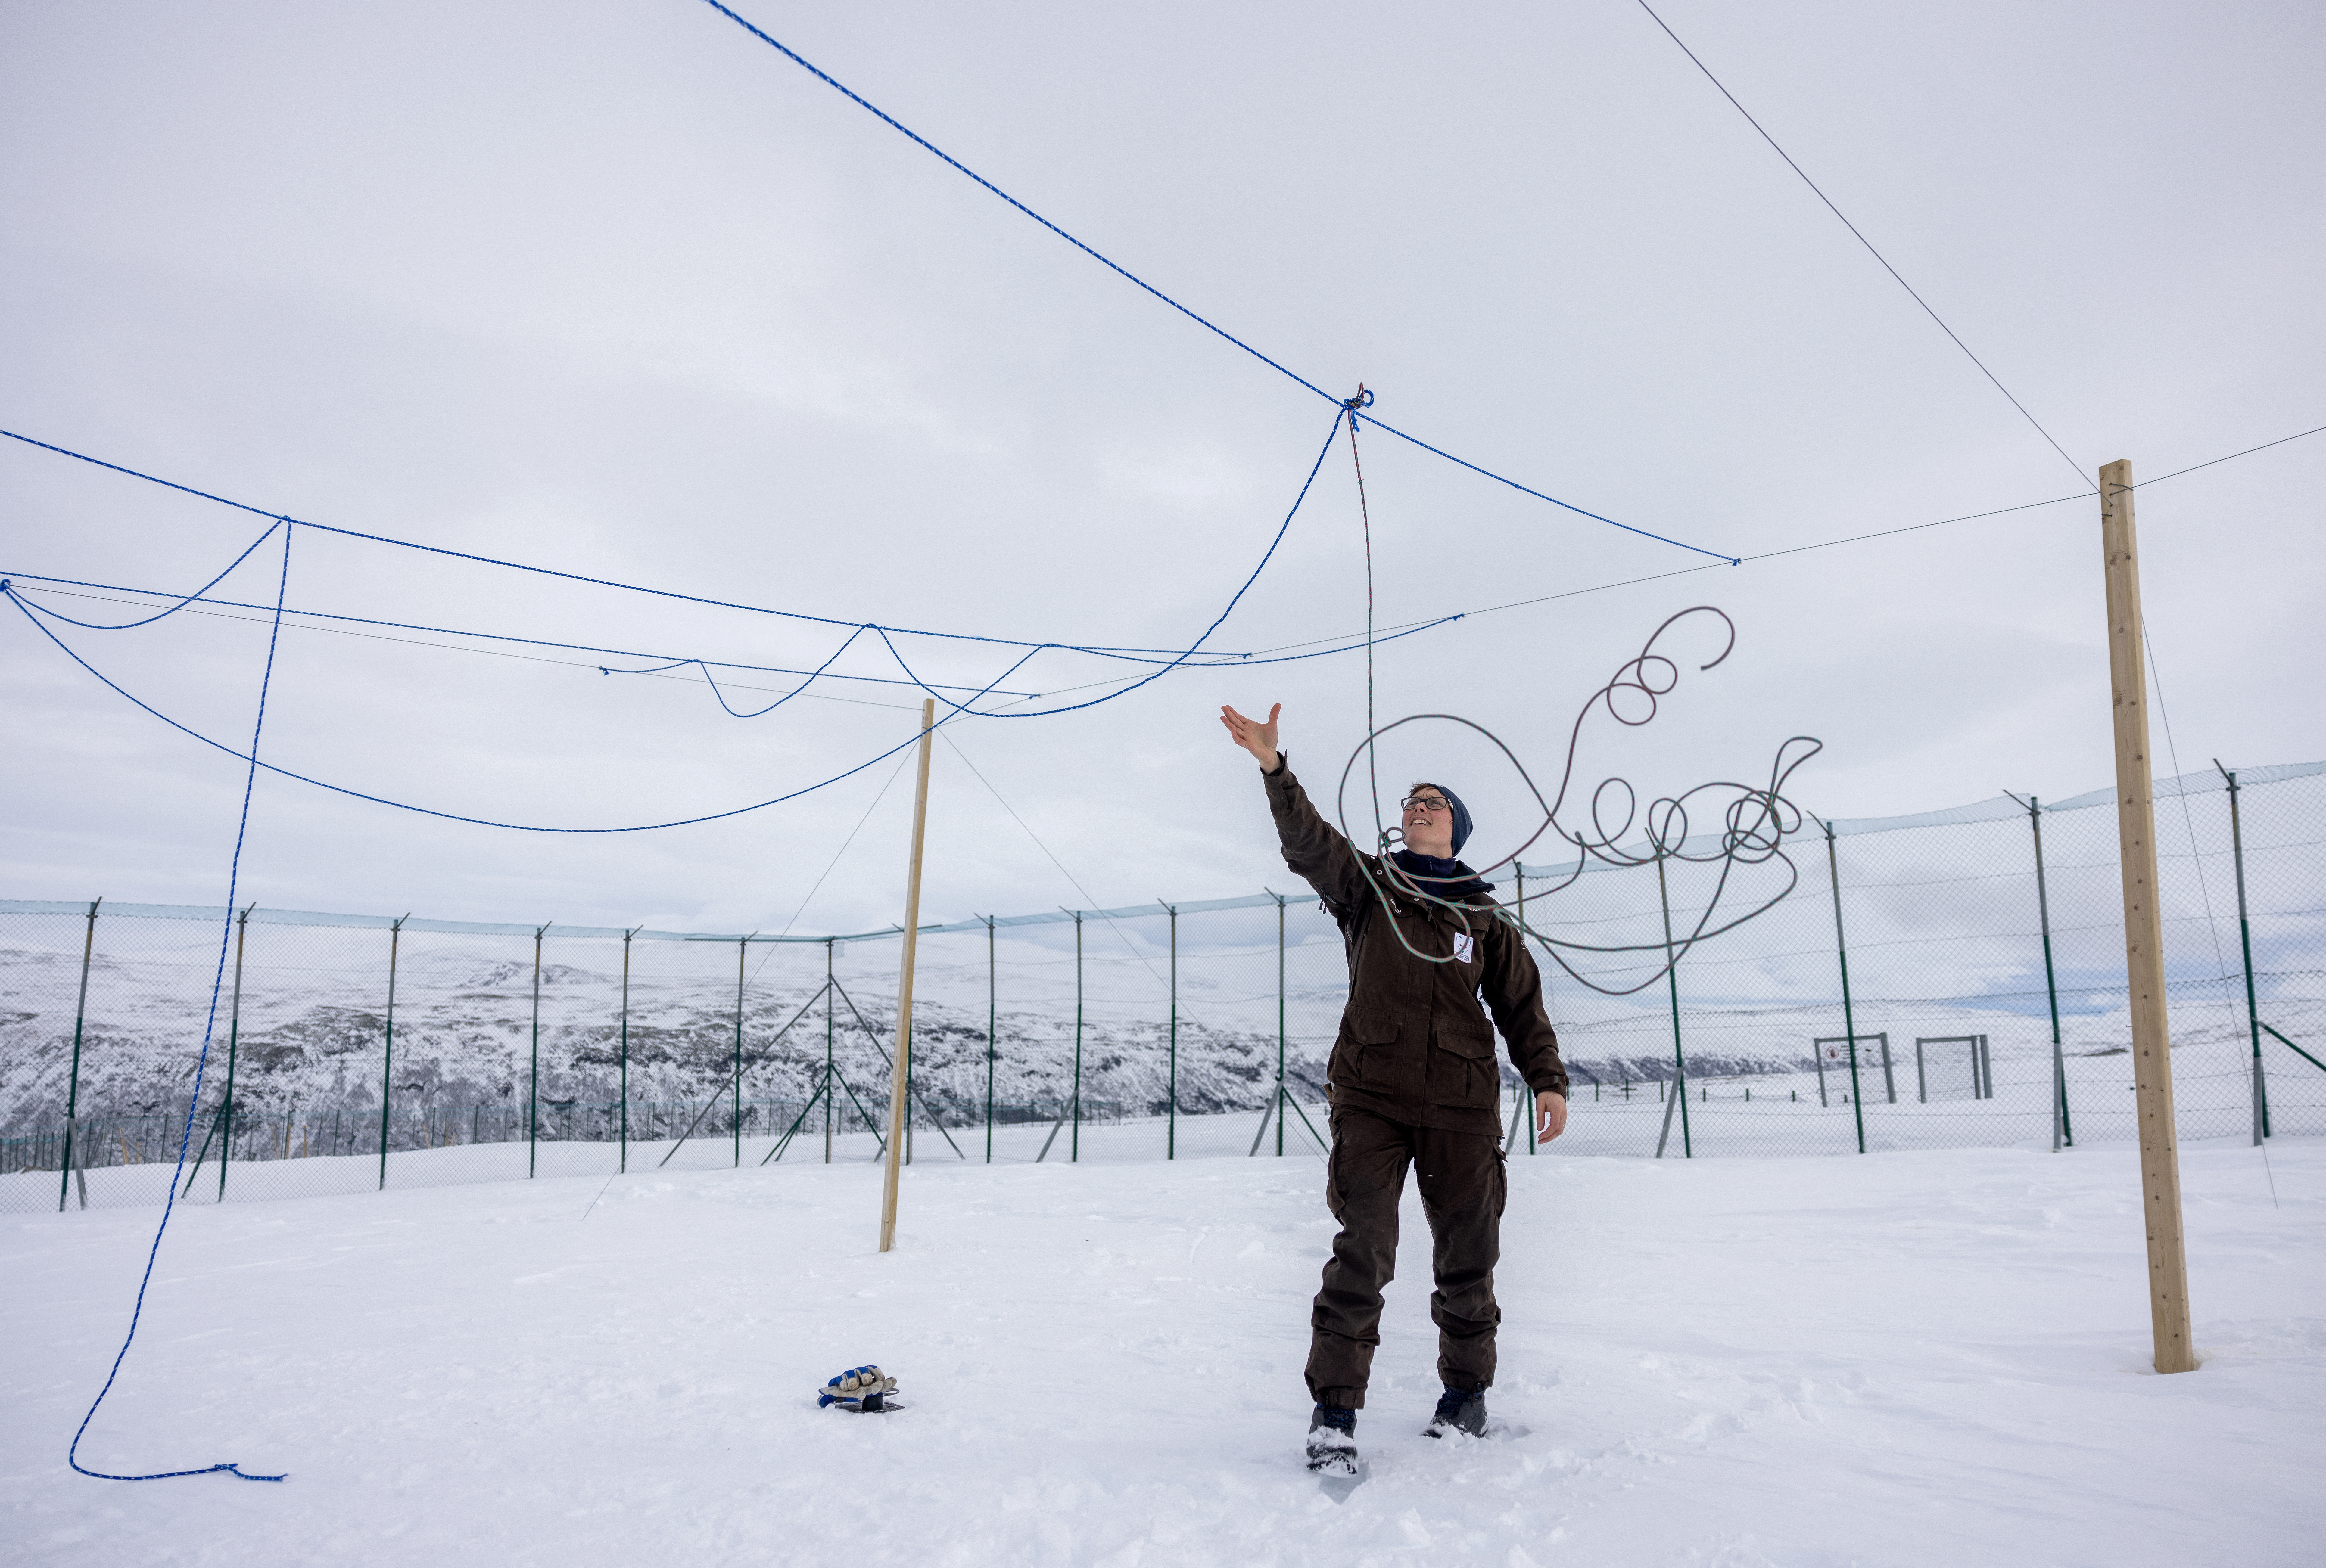 Conservation biologist Kristine R. Ulvund sets up ropes to protect foxes from eagle attacks, inside an enclosure at the Arctic Fox Captive Breeding Station run by Norwegian Institute for Nature Research (NINA) near Oppdal, Norway, March 22